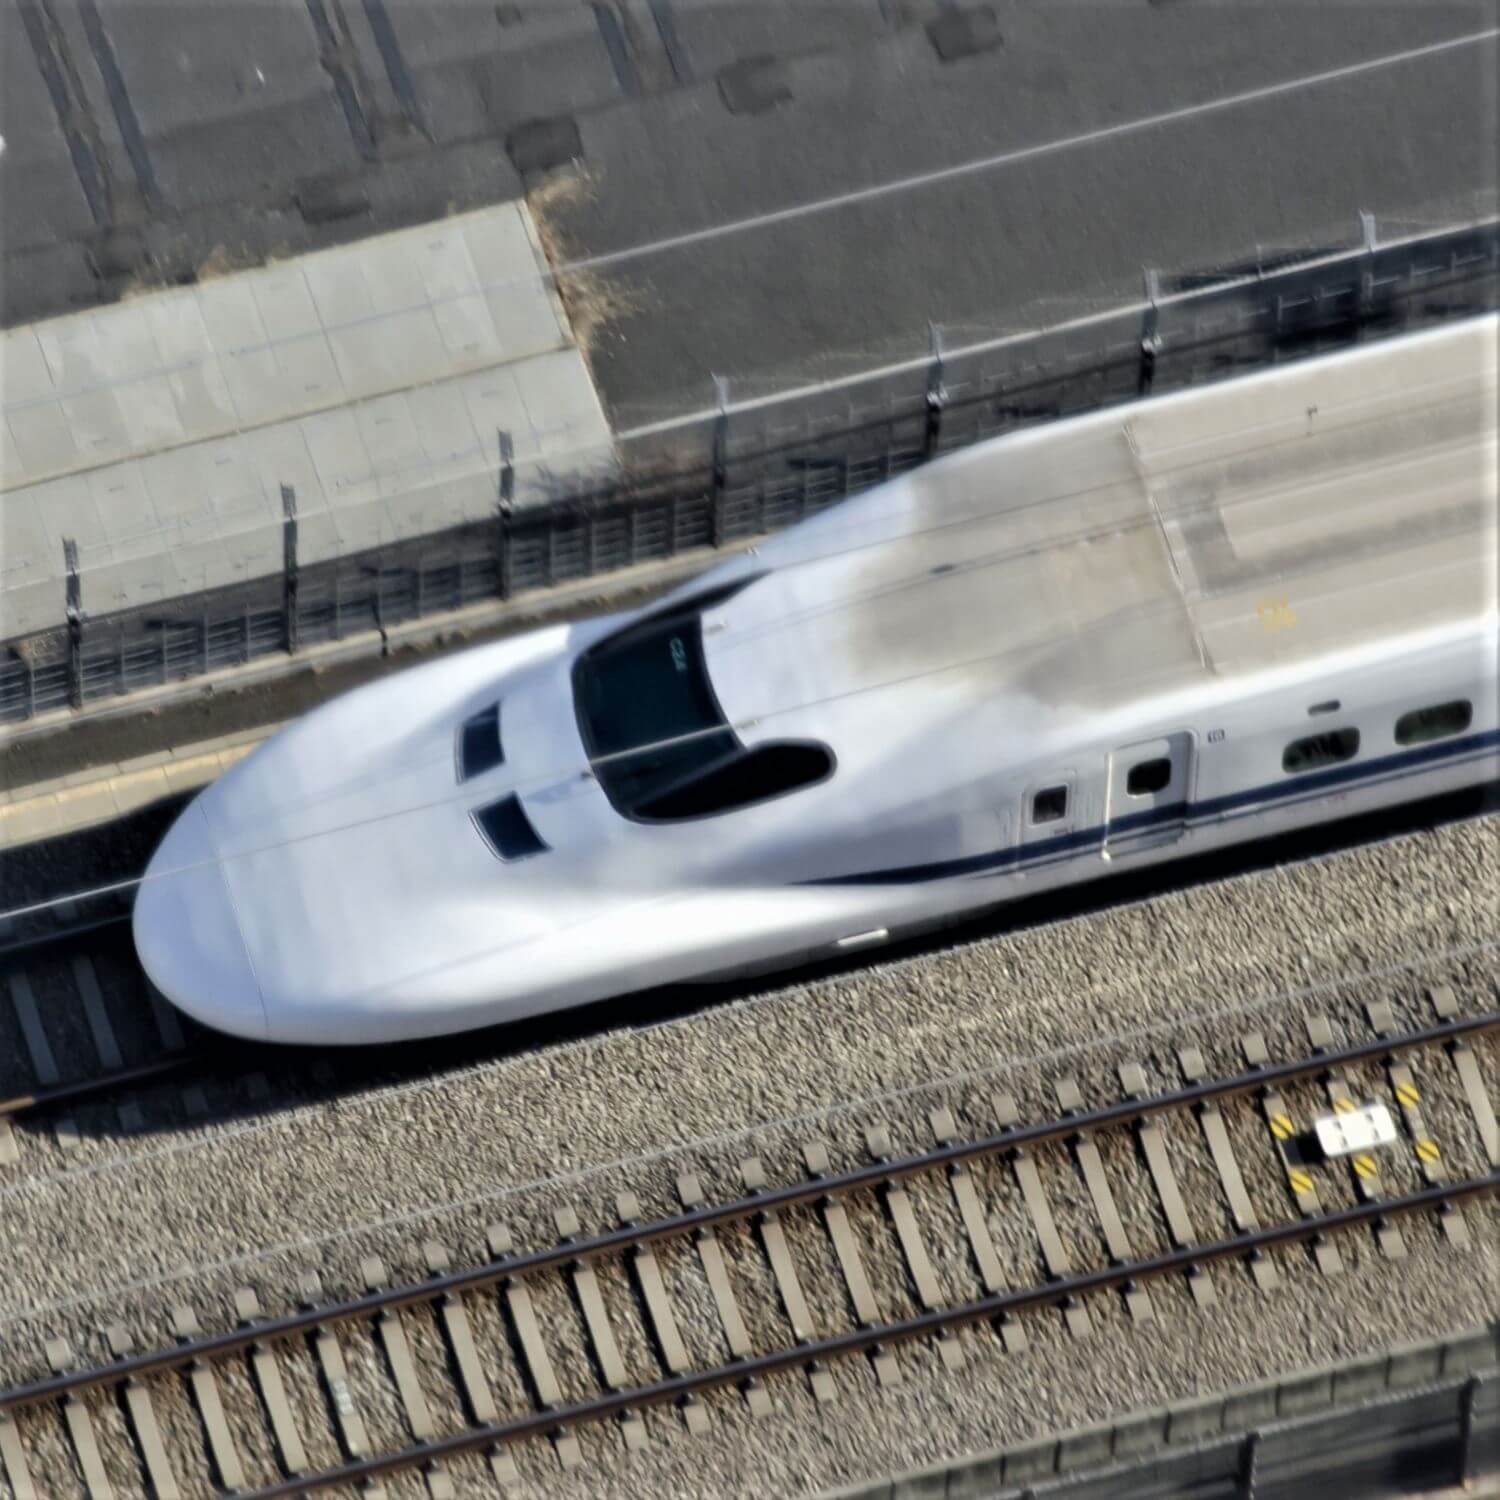 The Shinkansen connects various parts of Japan in accurate time 7